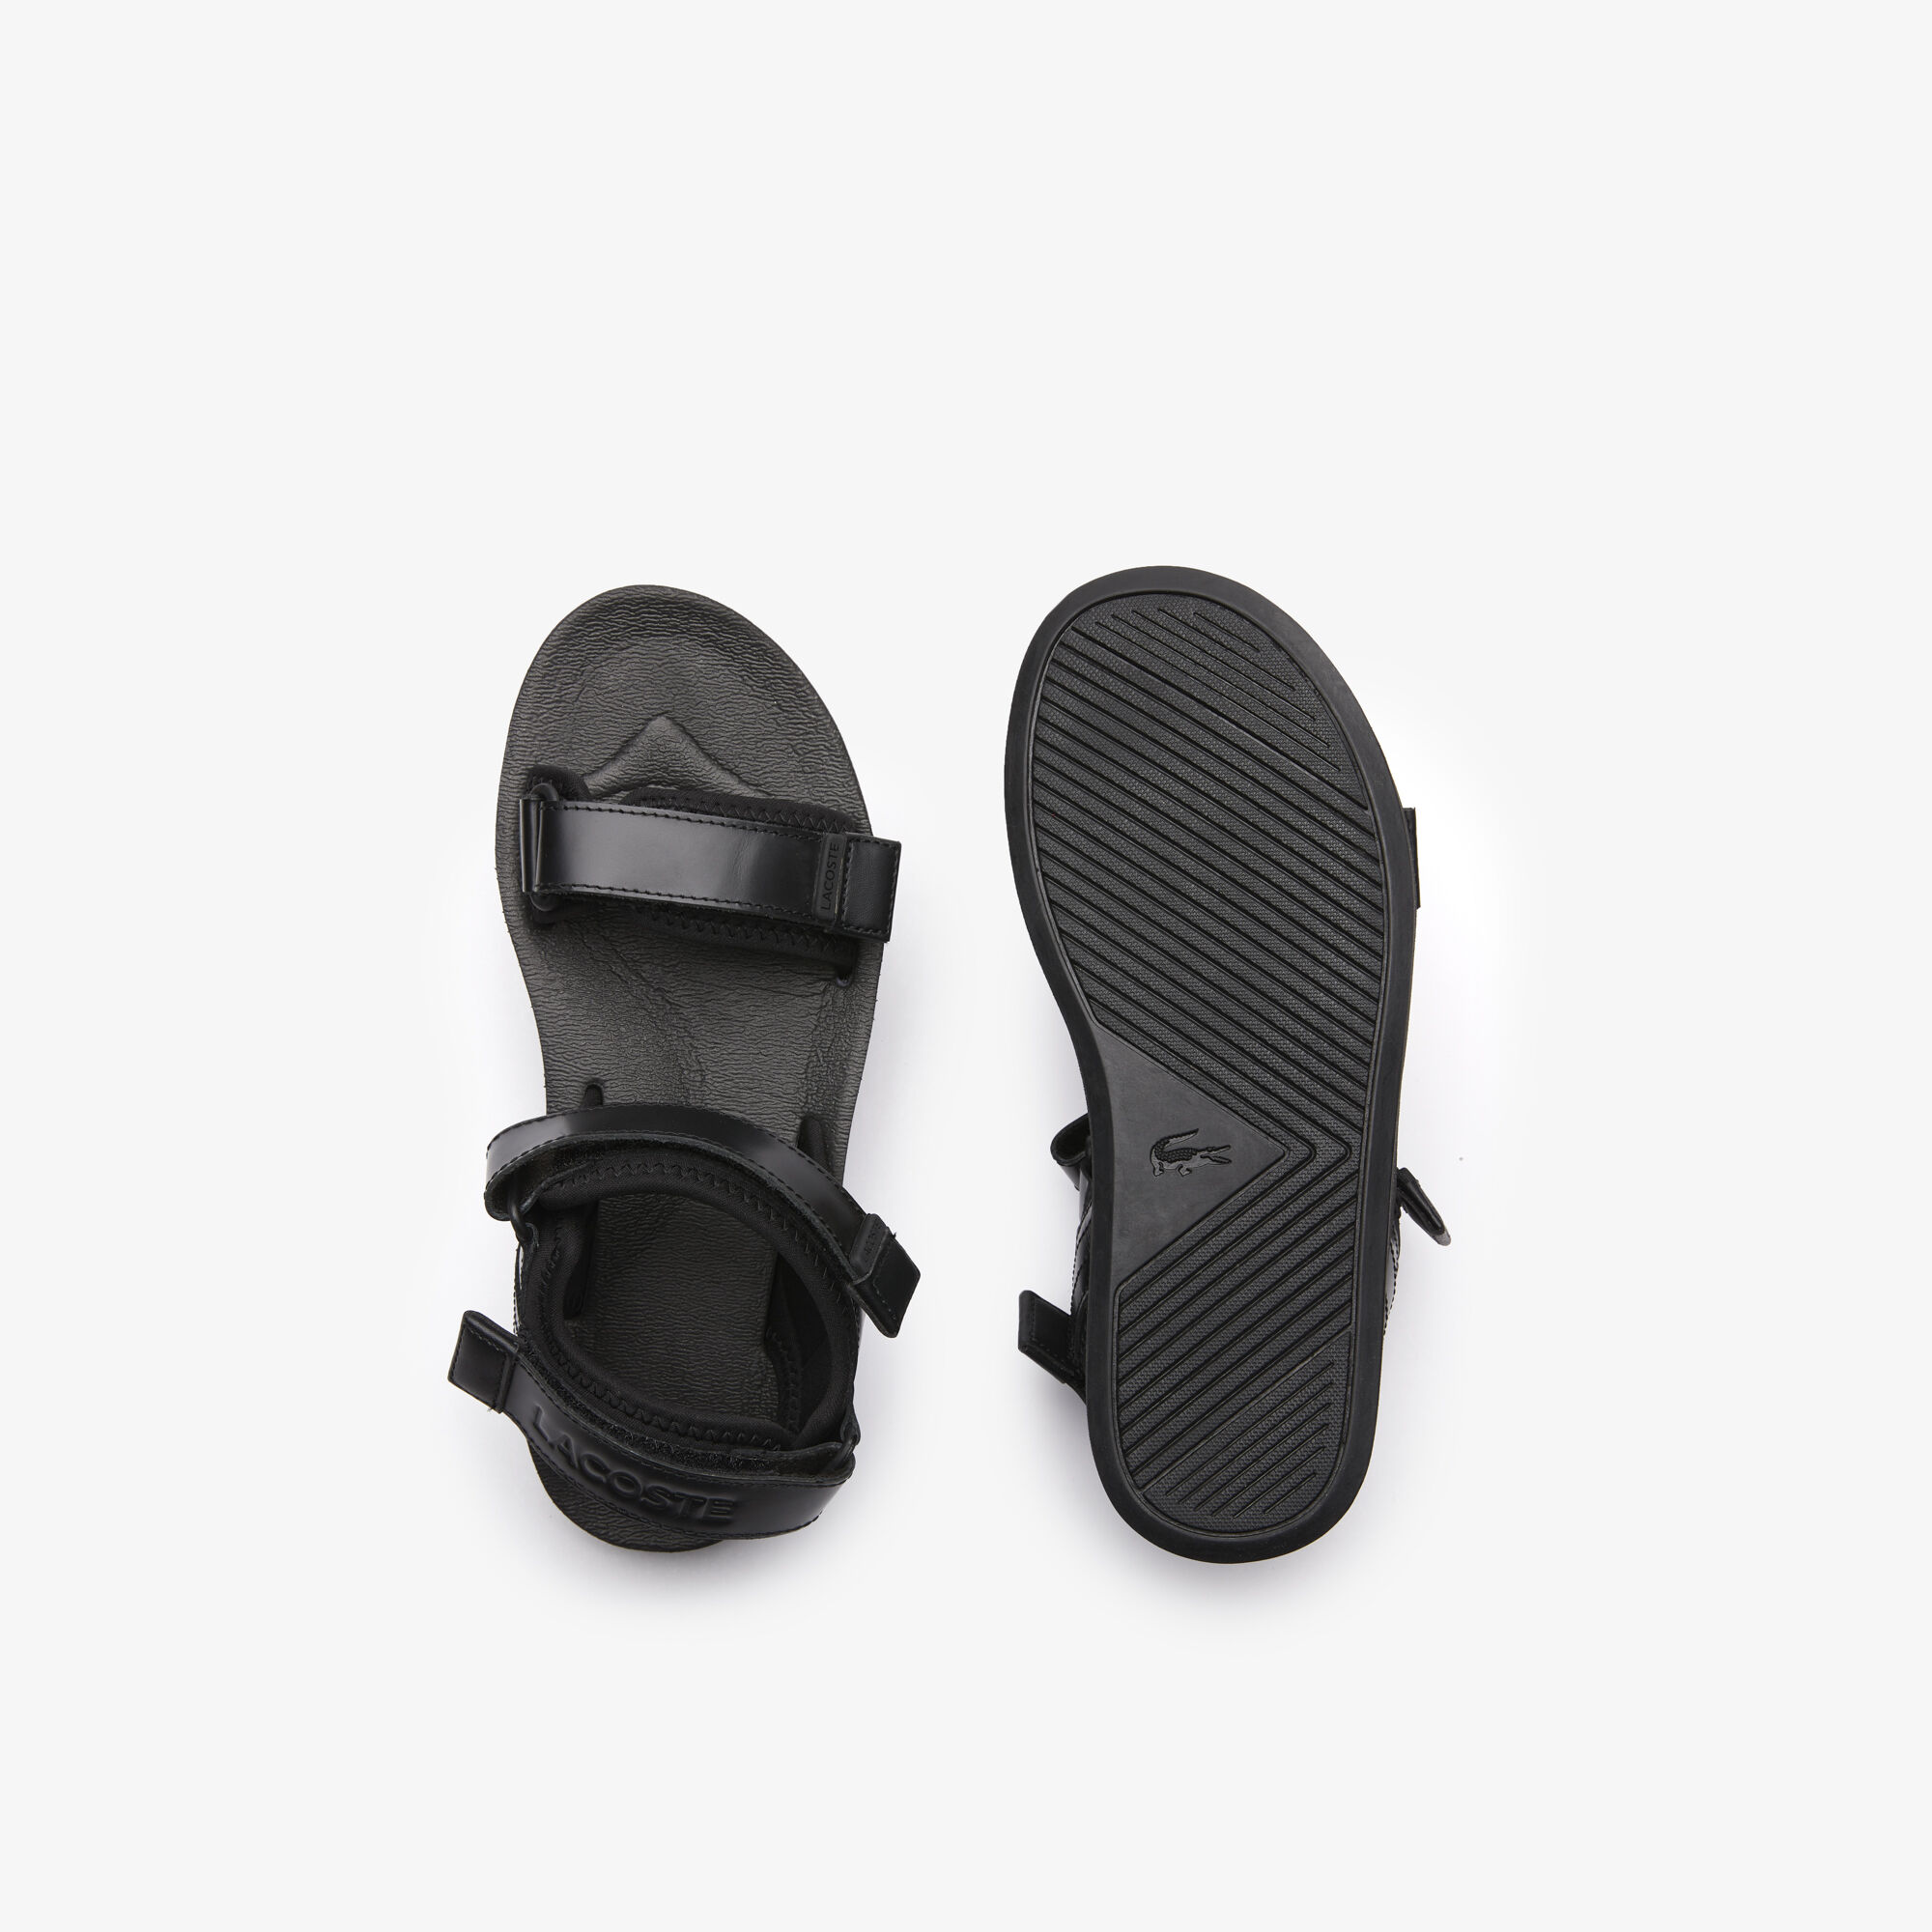 Women's Suruga Leather and Textile Sandals